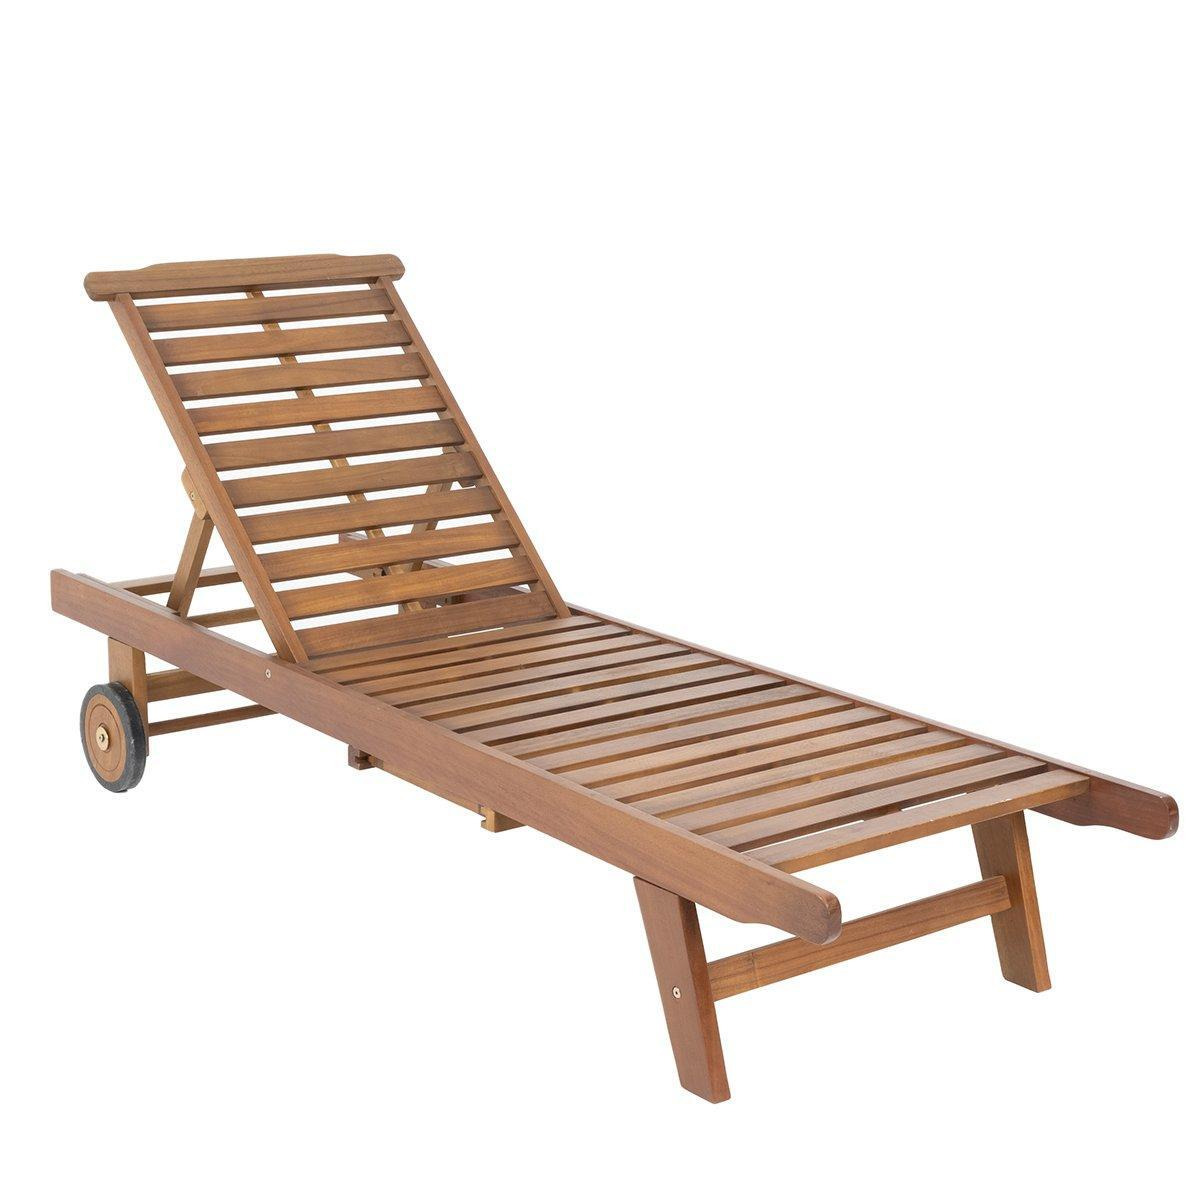 Acacia Wooden Reclining Sun Lounger With Pull Out Tray - image 1